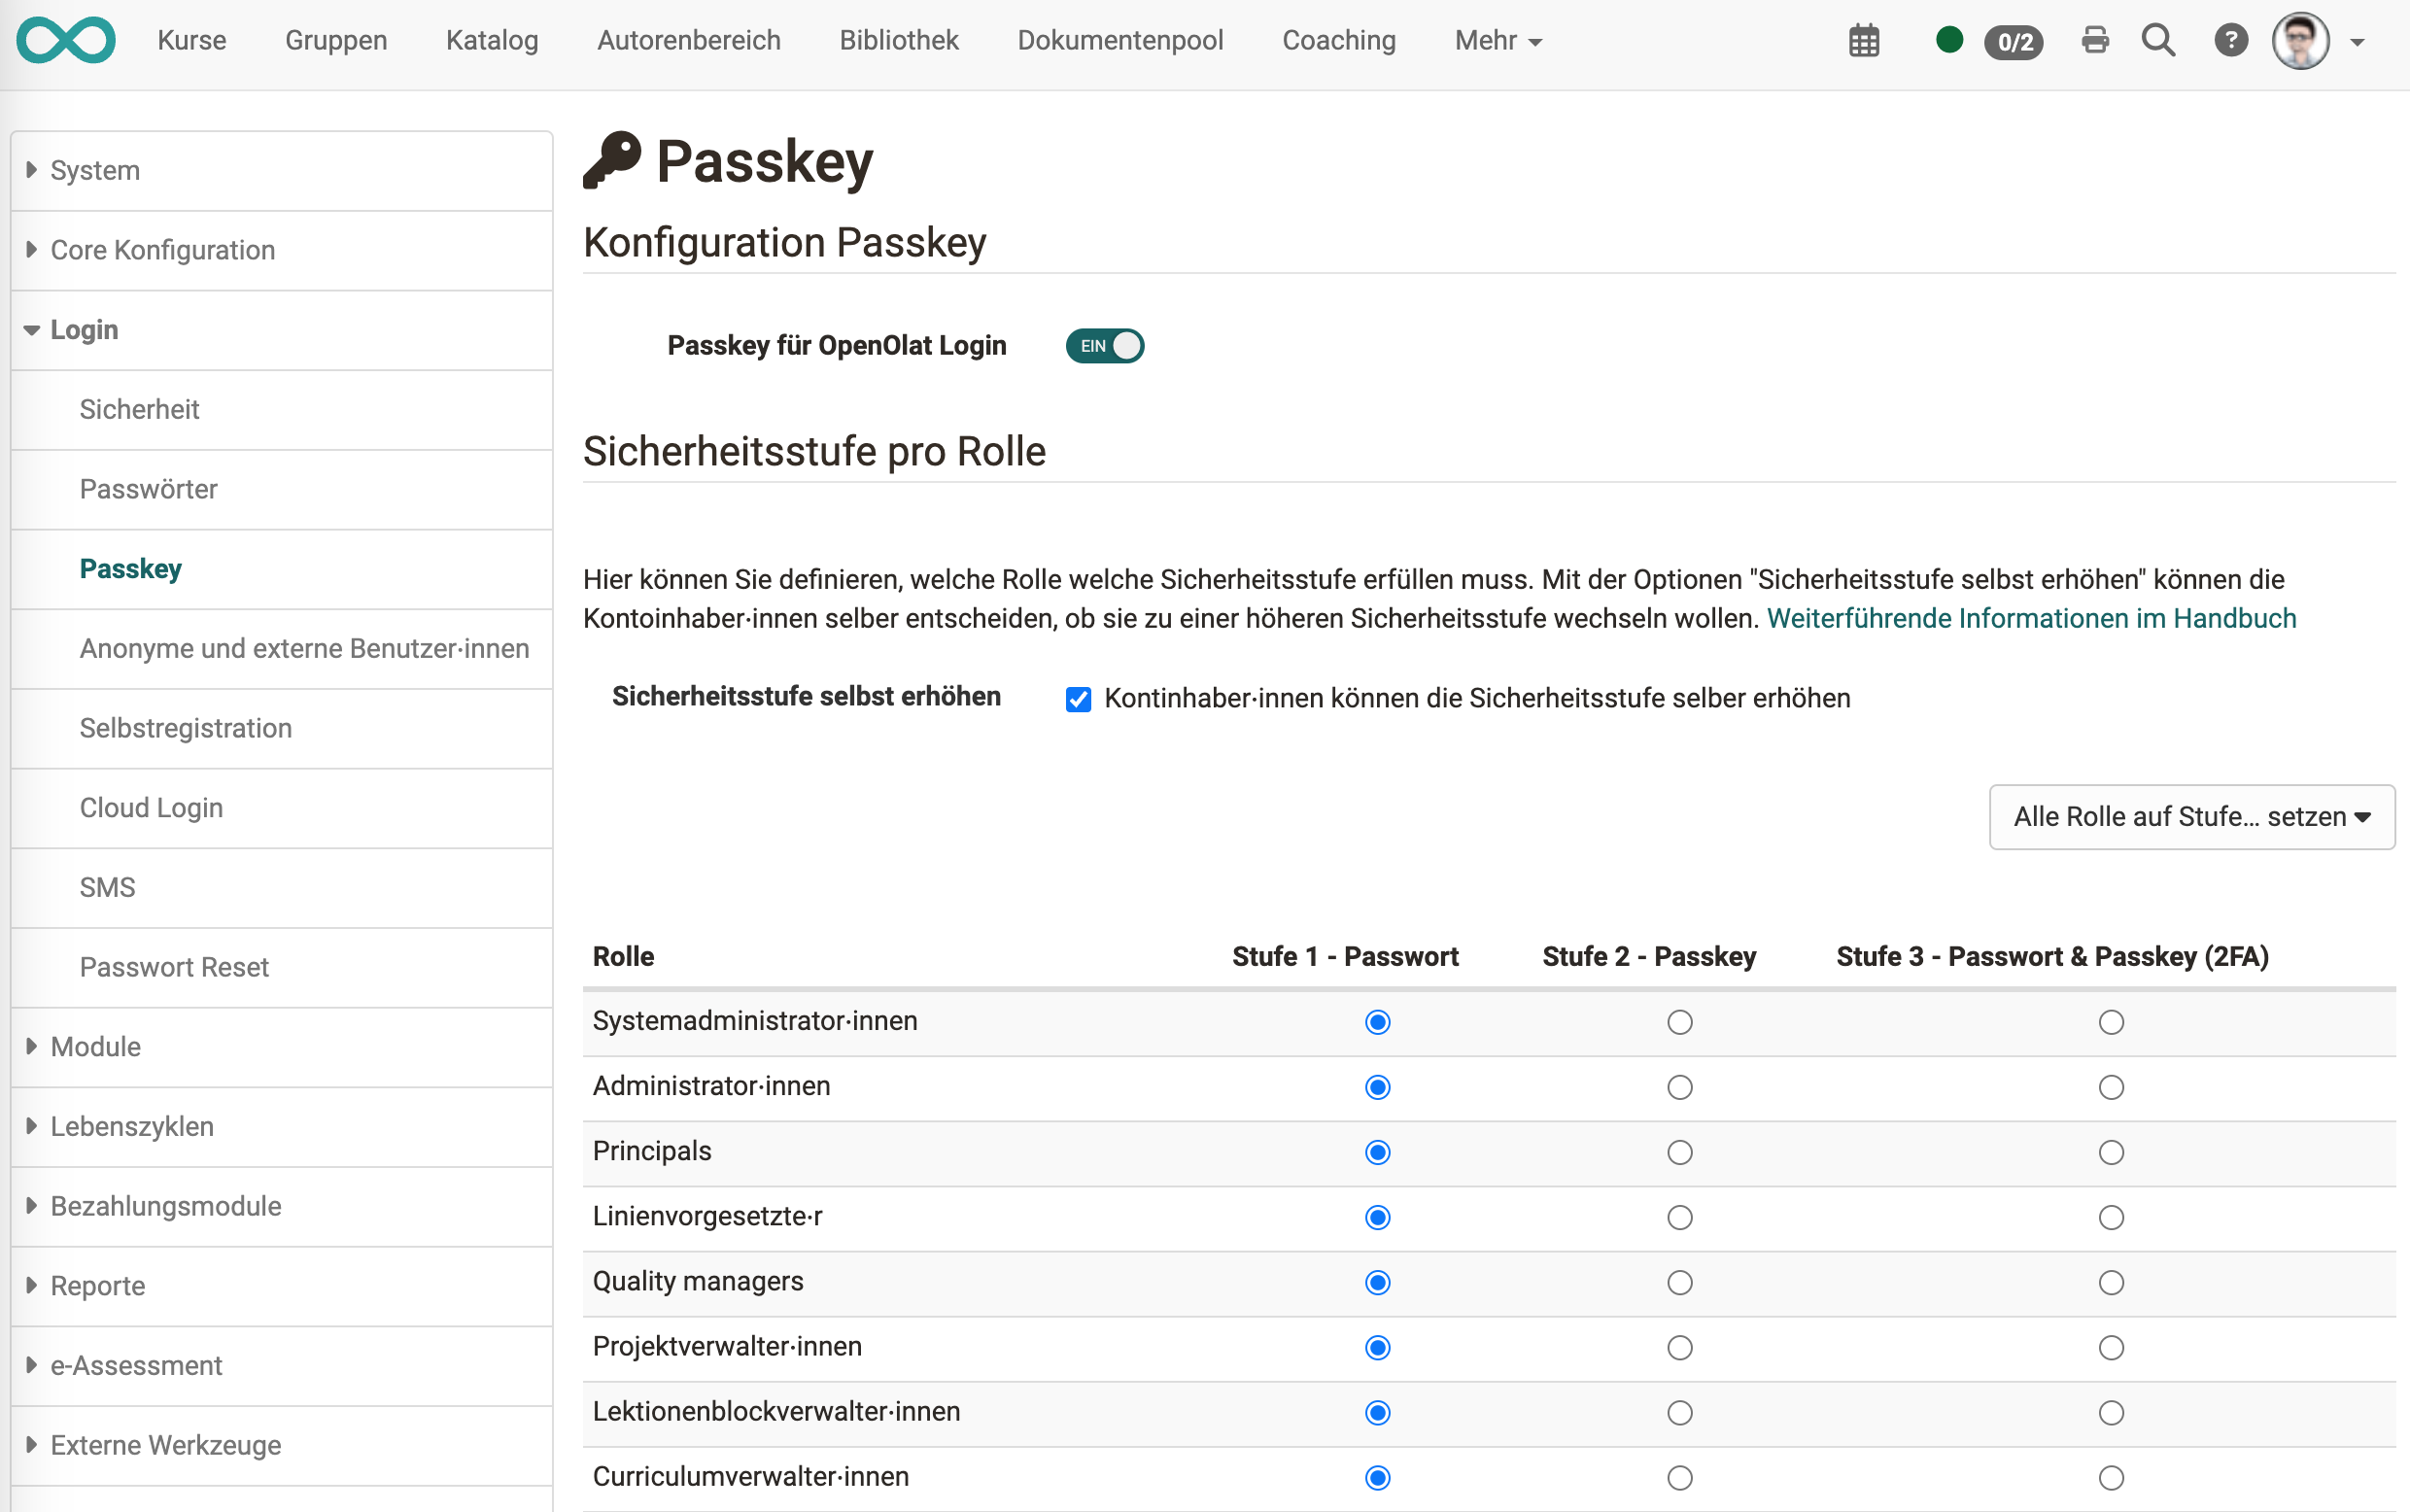 Passkey security levels